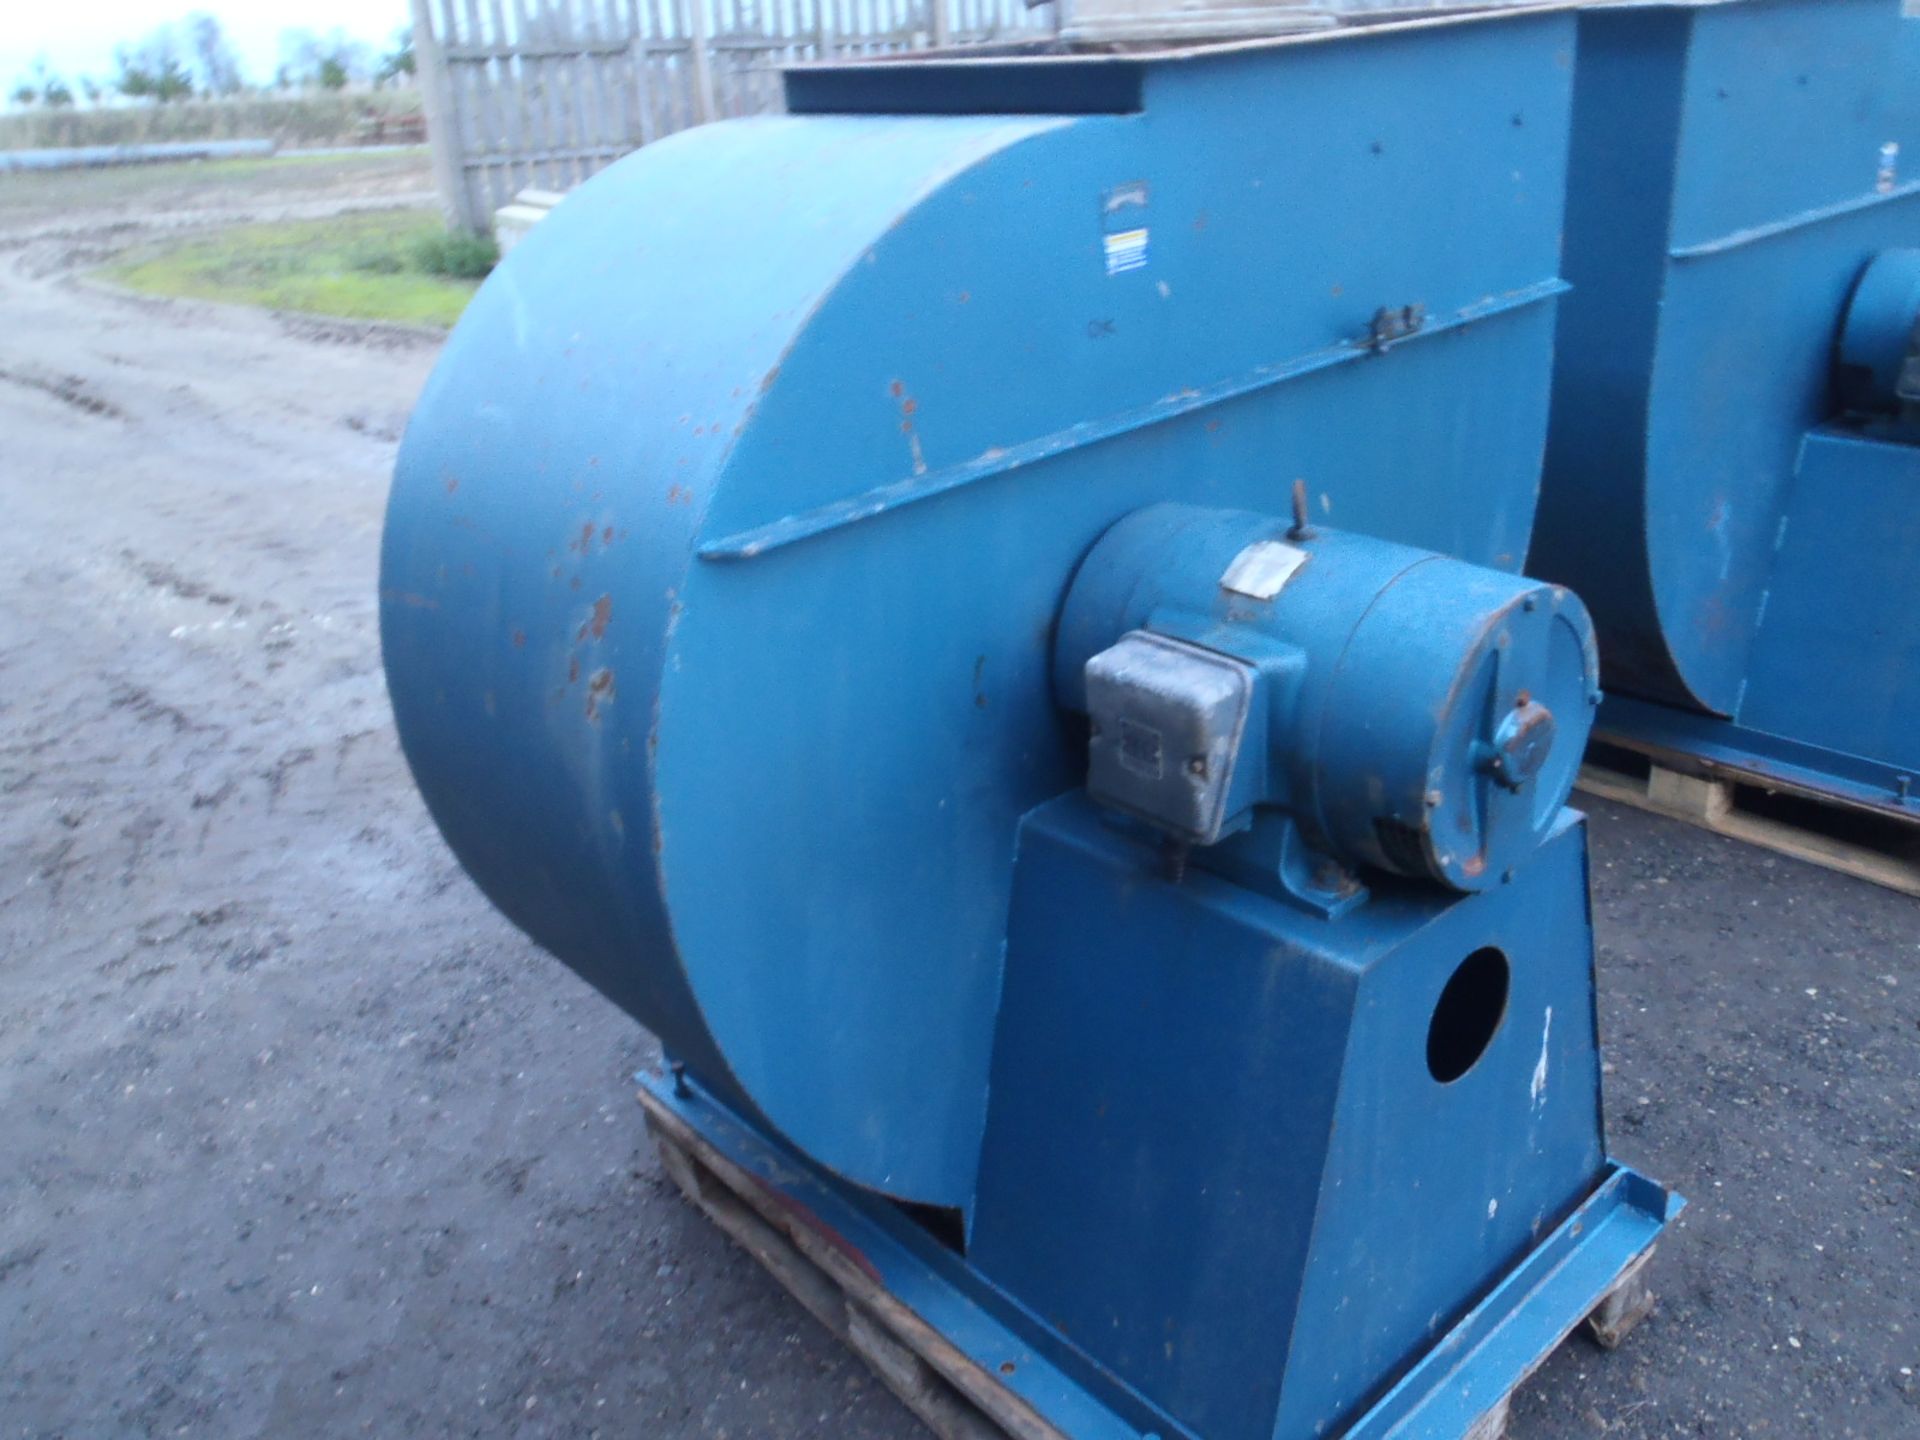 Centrifugal Fan, 18.5kW, three phase, approx. 1300